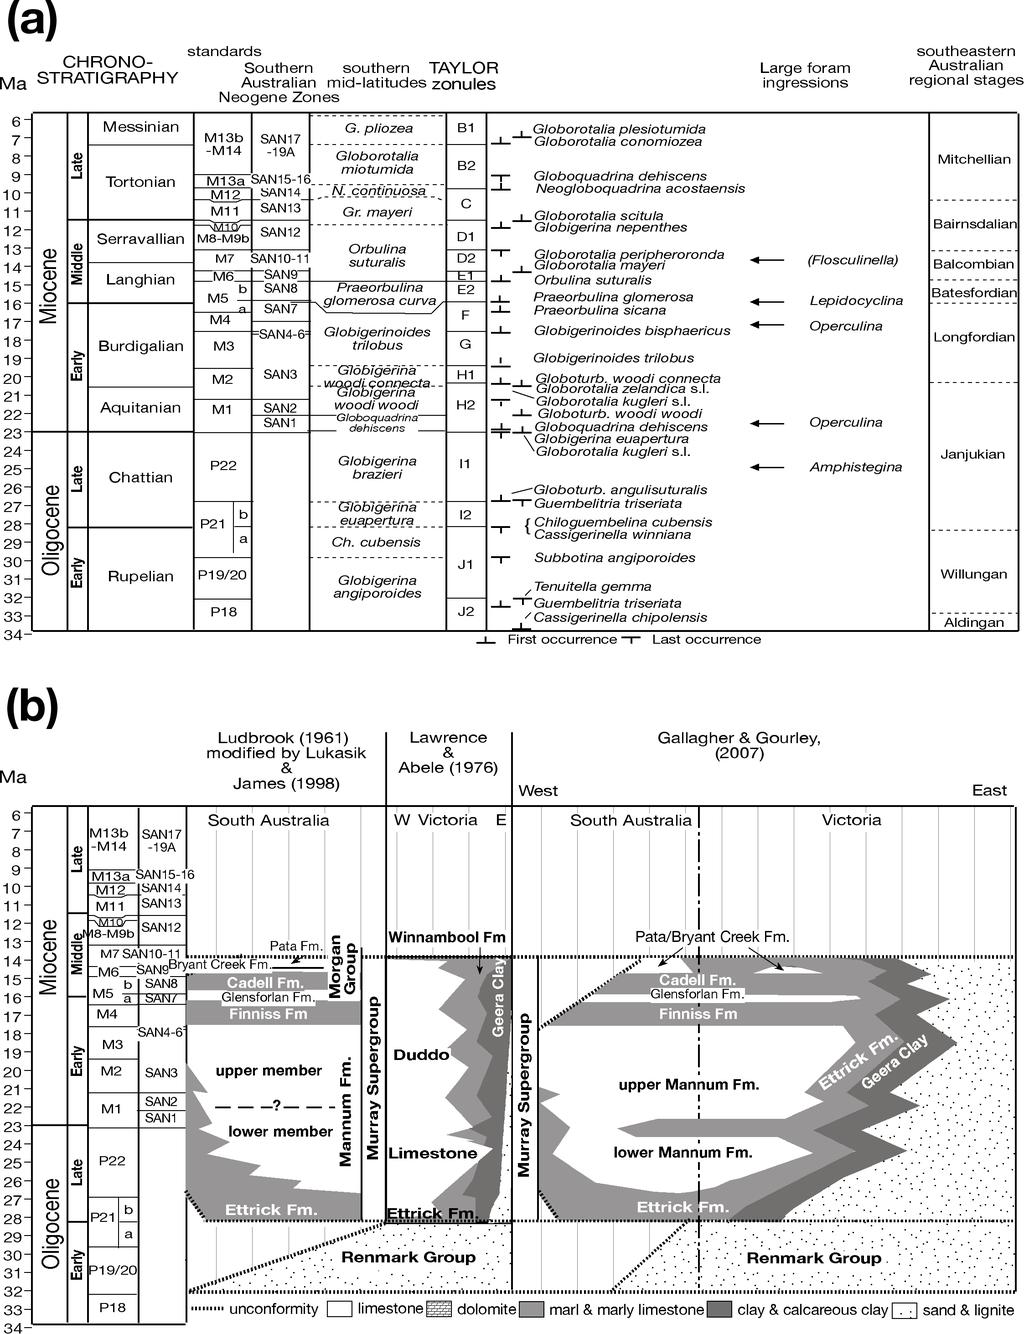 2 The biostratigraphic scheme and the lithostratigraphic nomenclature used in the report are shown in Figure 1.